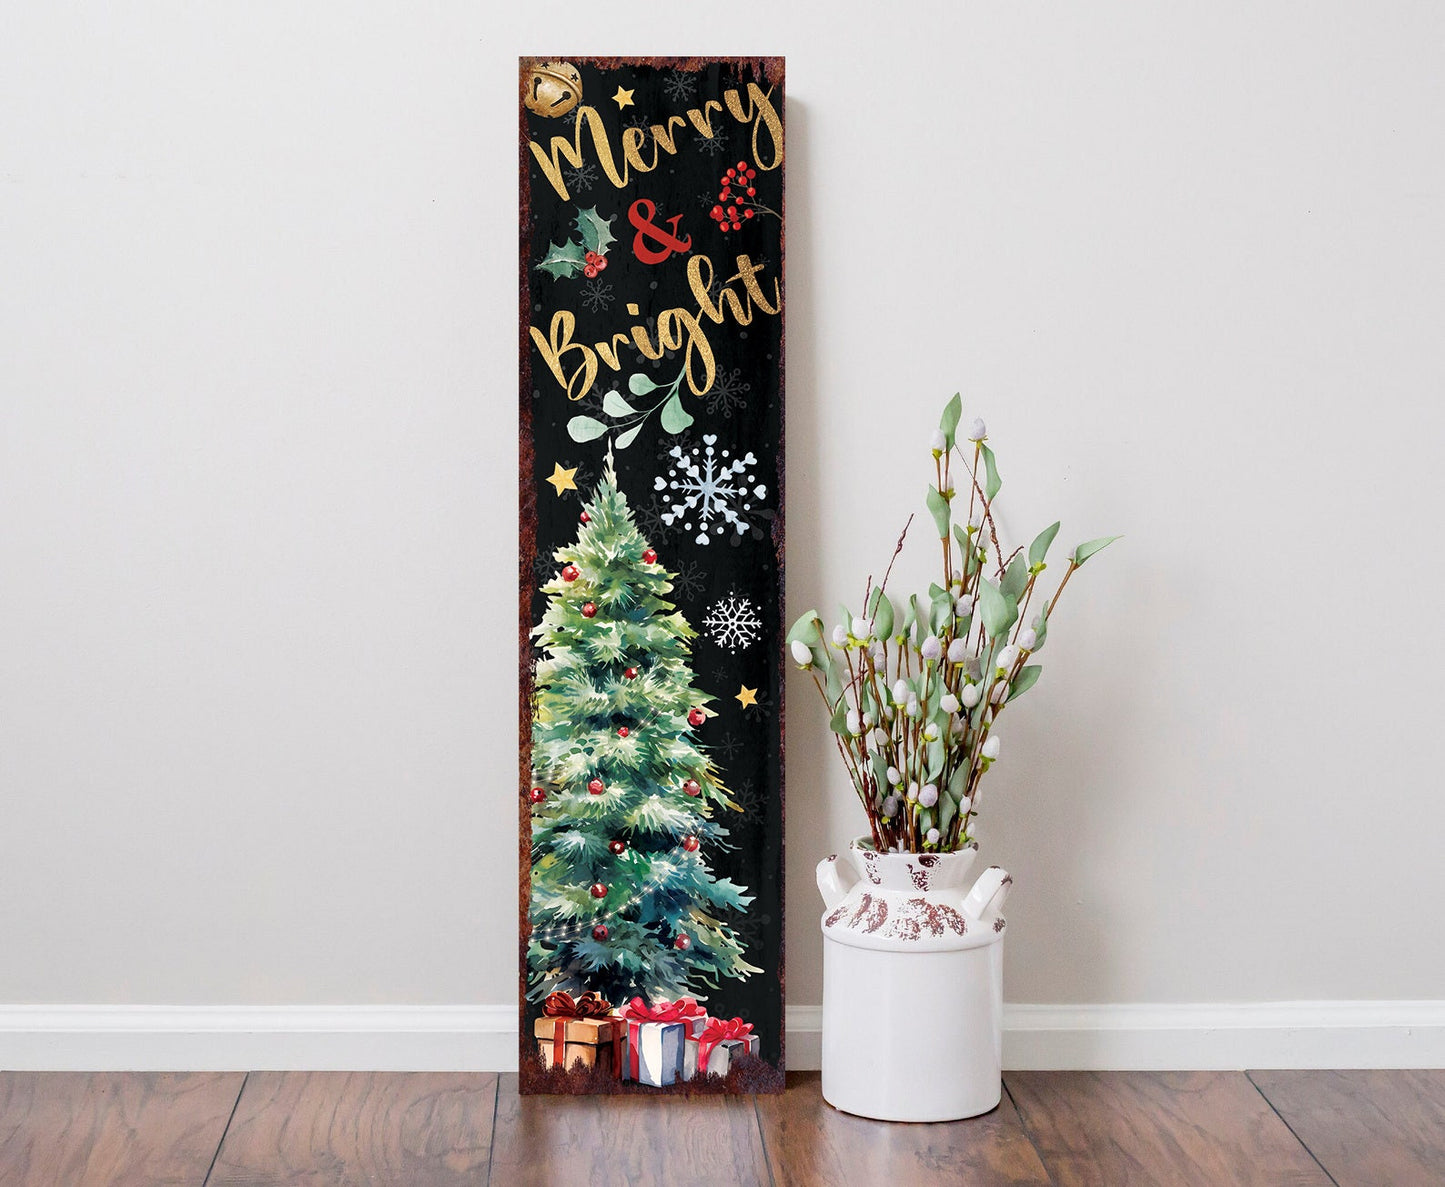 36in Merry & Bright Christmas Porch Sign - Front Porch Christmas Welcome Sign, Modern Farmhouse Entryway Board